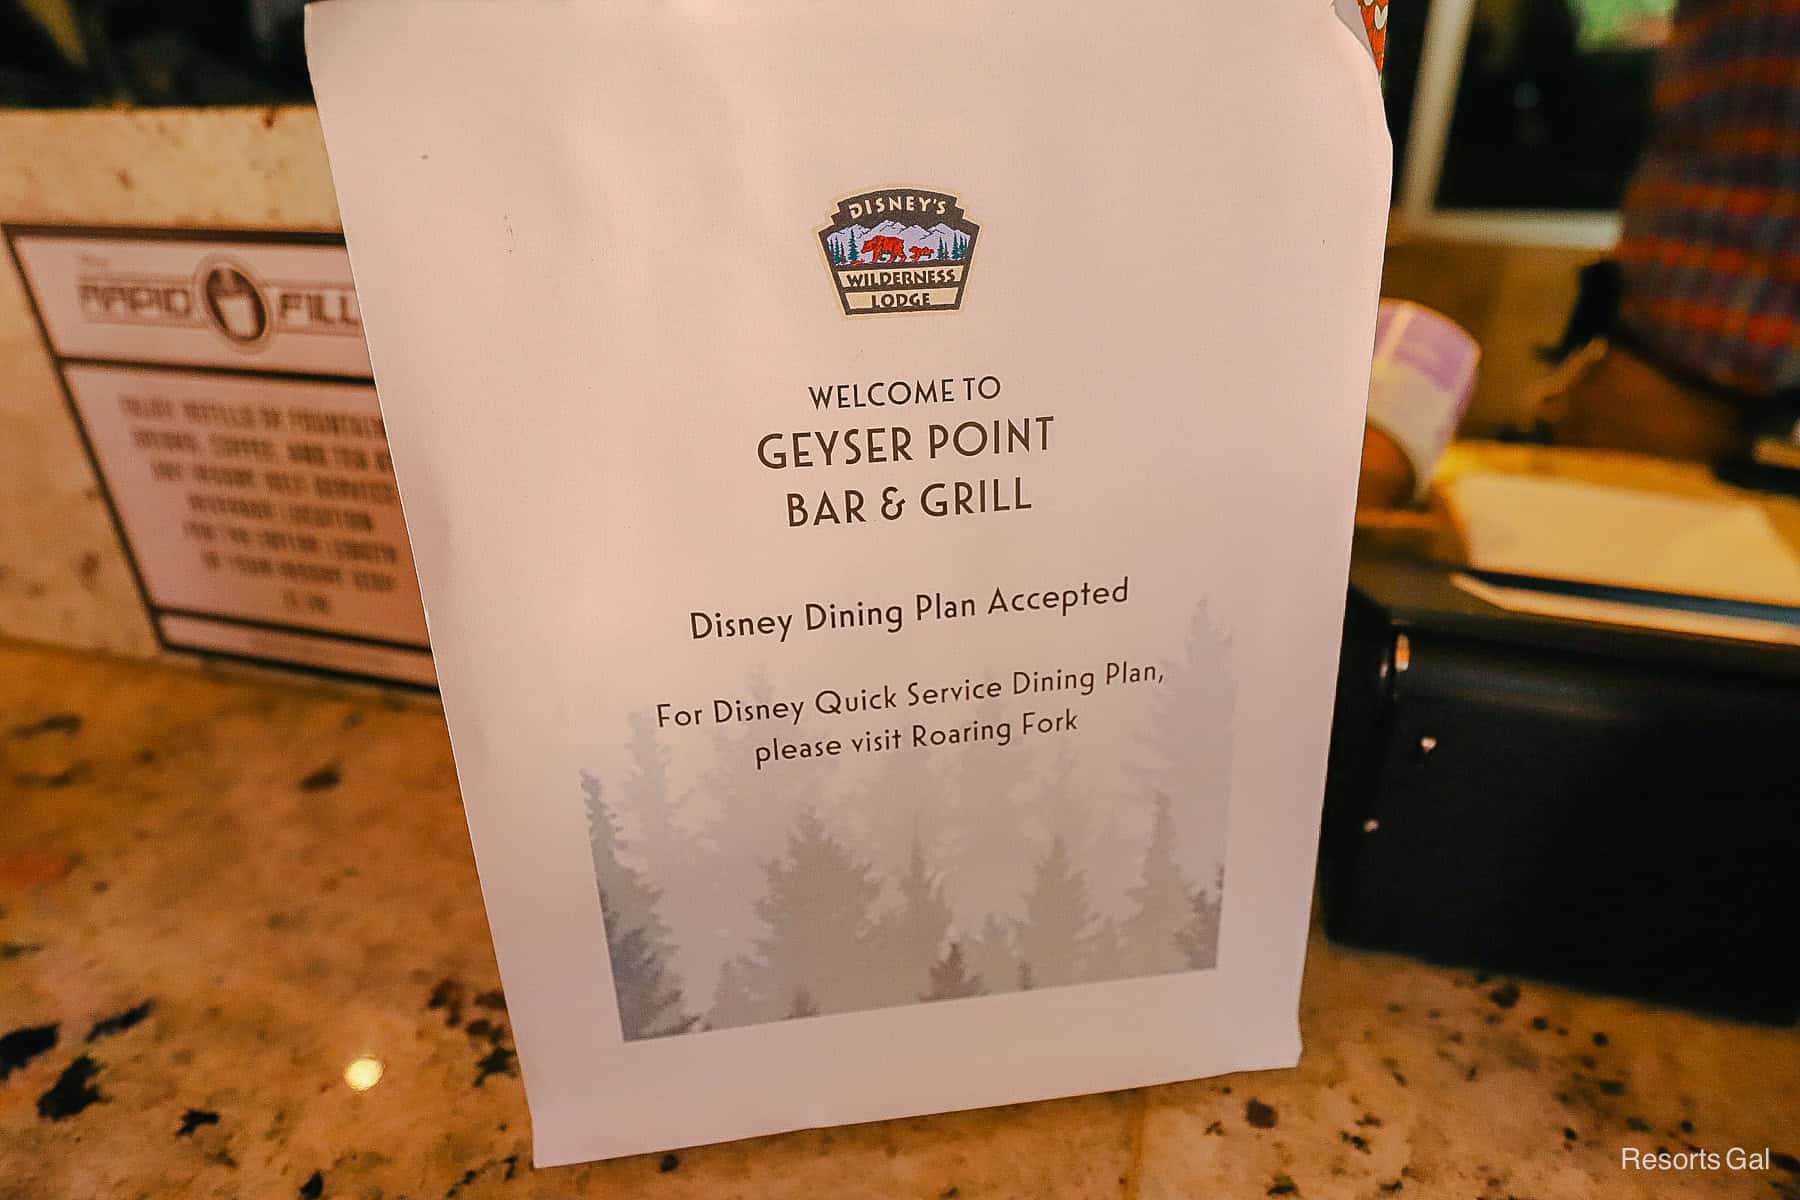 a sign that tells guests that the Disney Dining Plan is accepted at Geyser Point but the Quick Service Dining Plan is not 